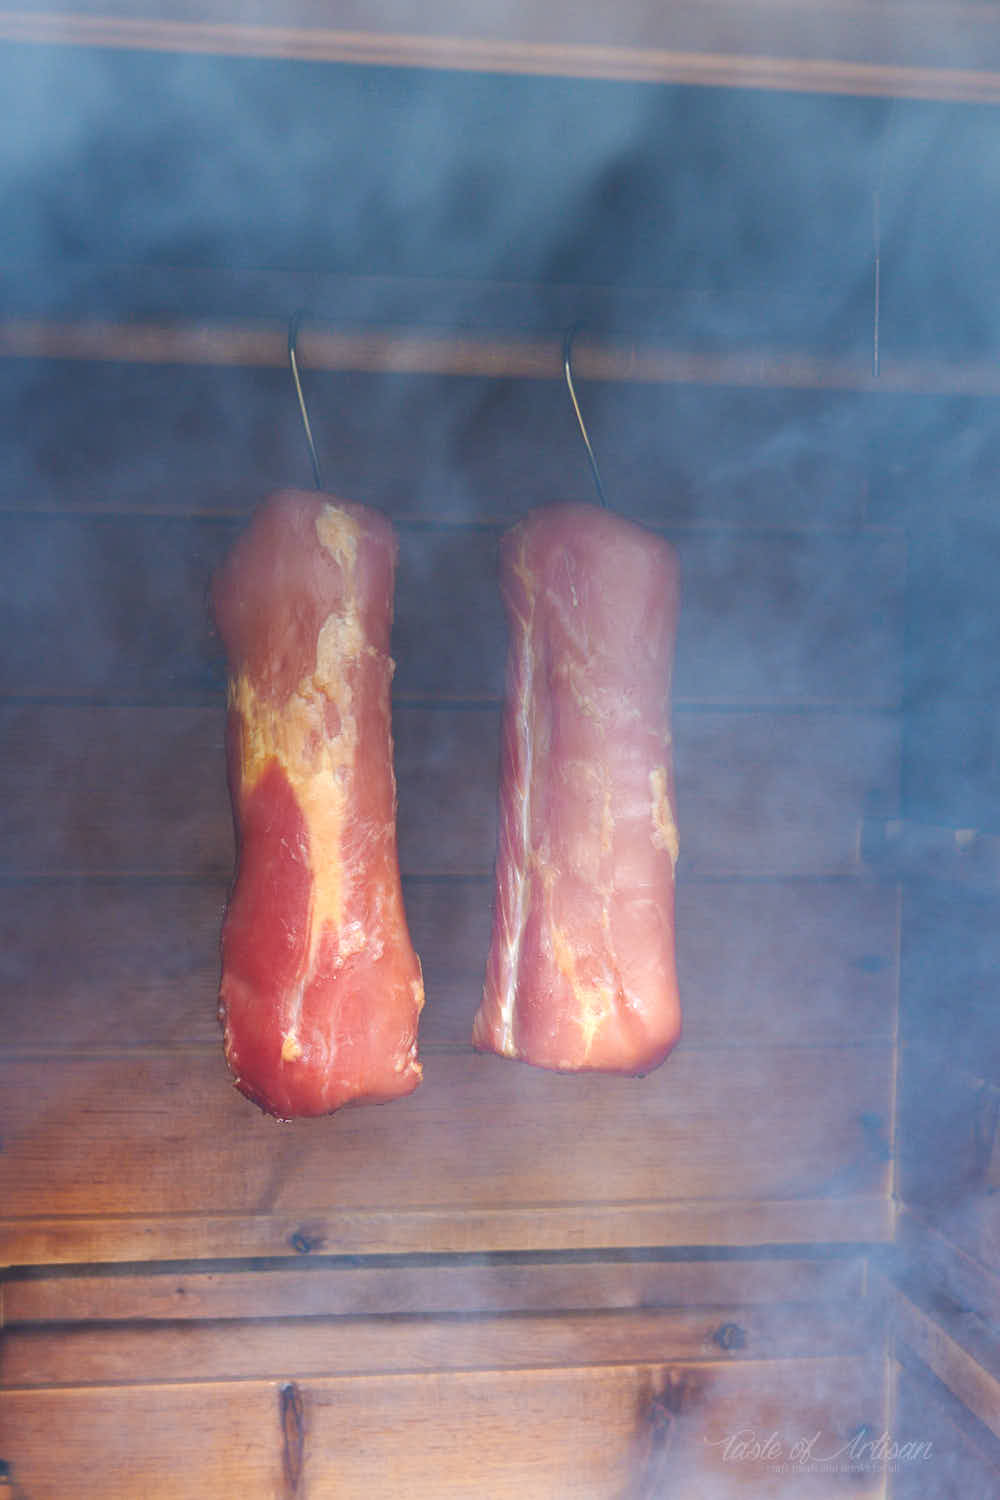 Pork loins hanging in a smokehouse.